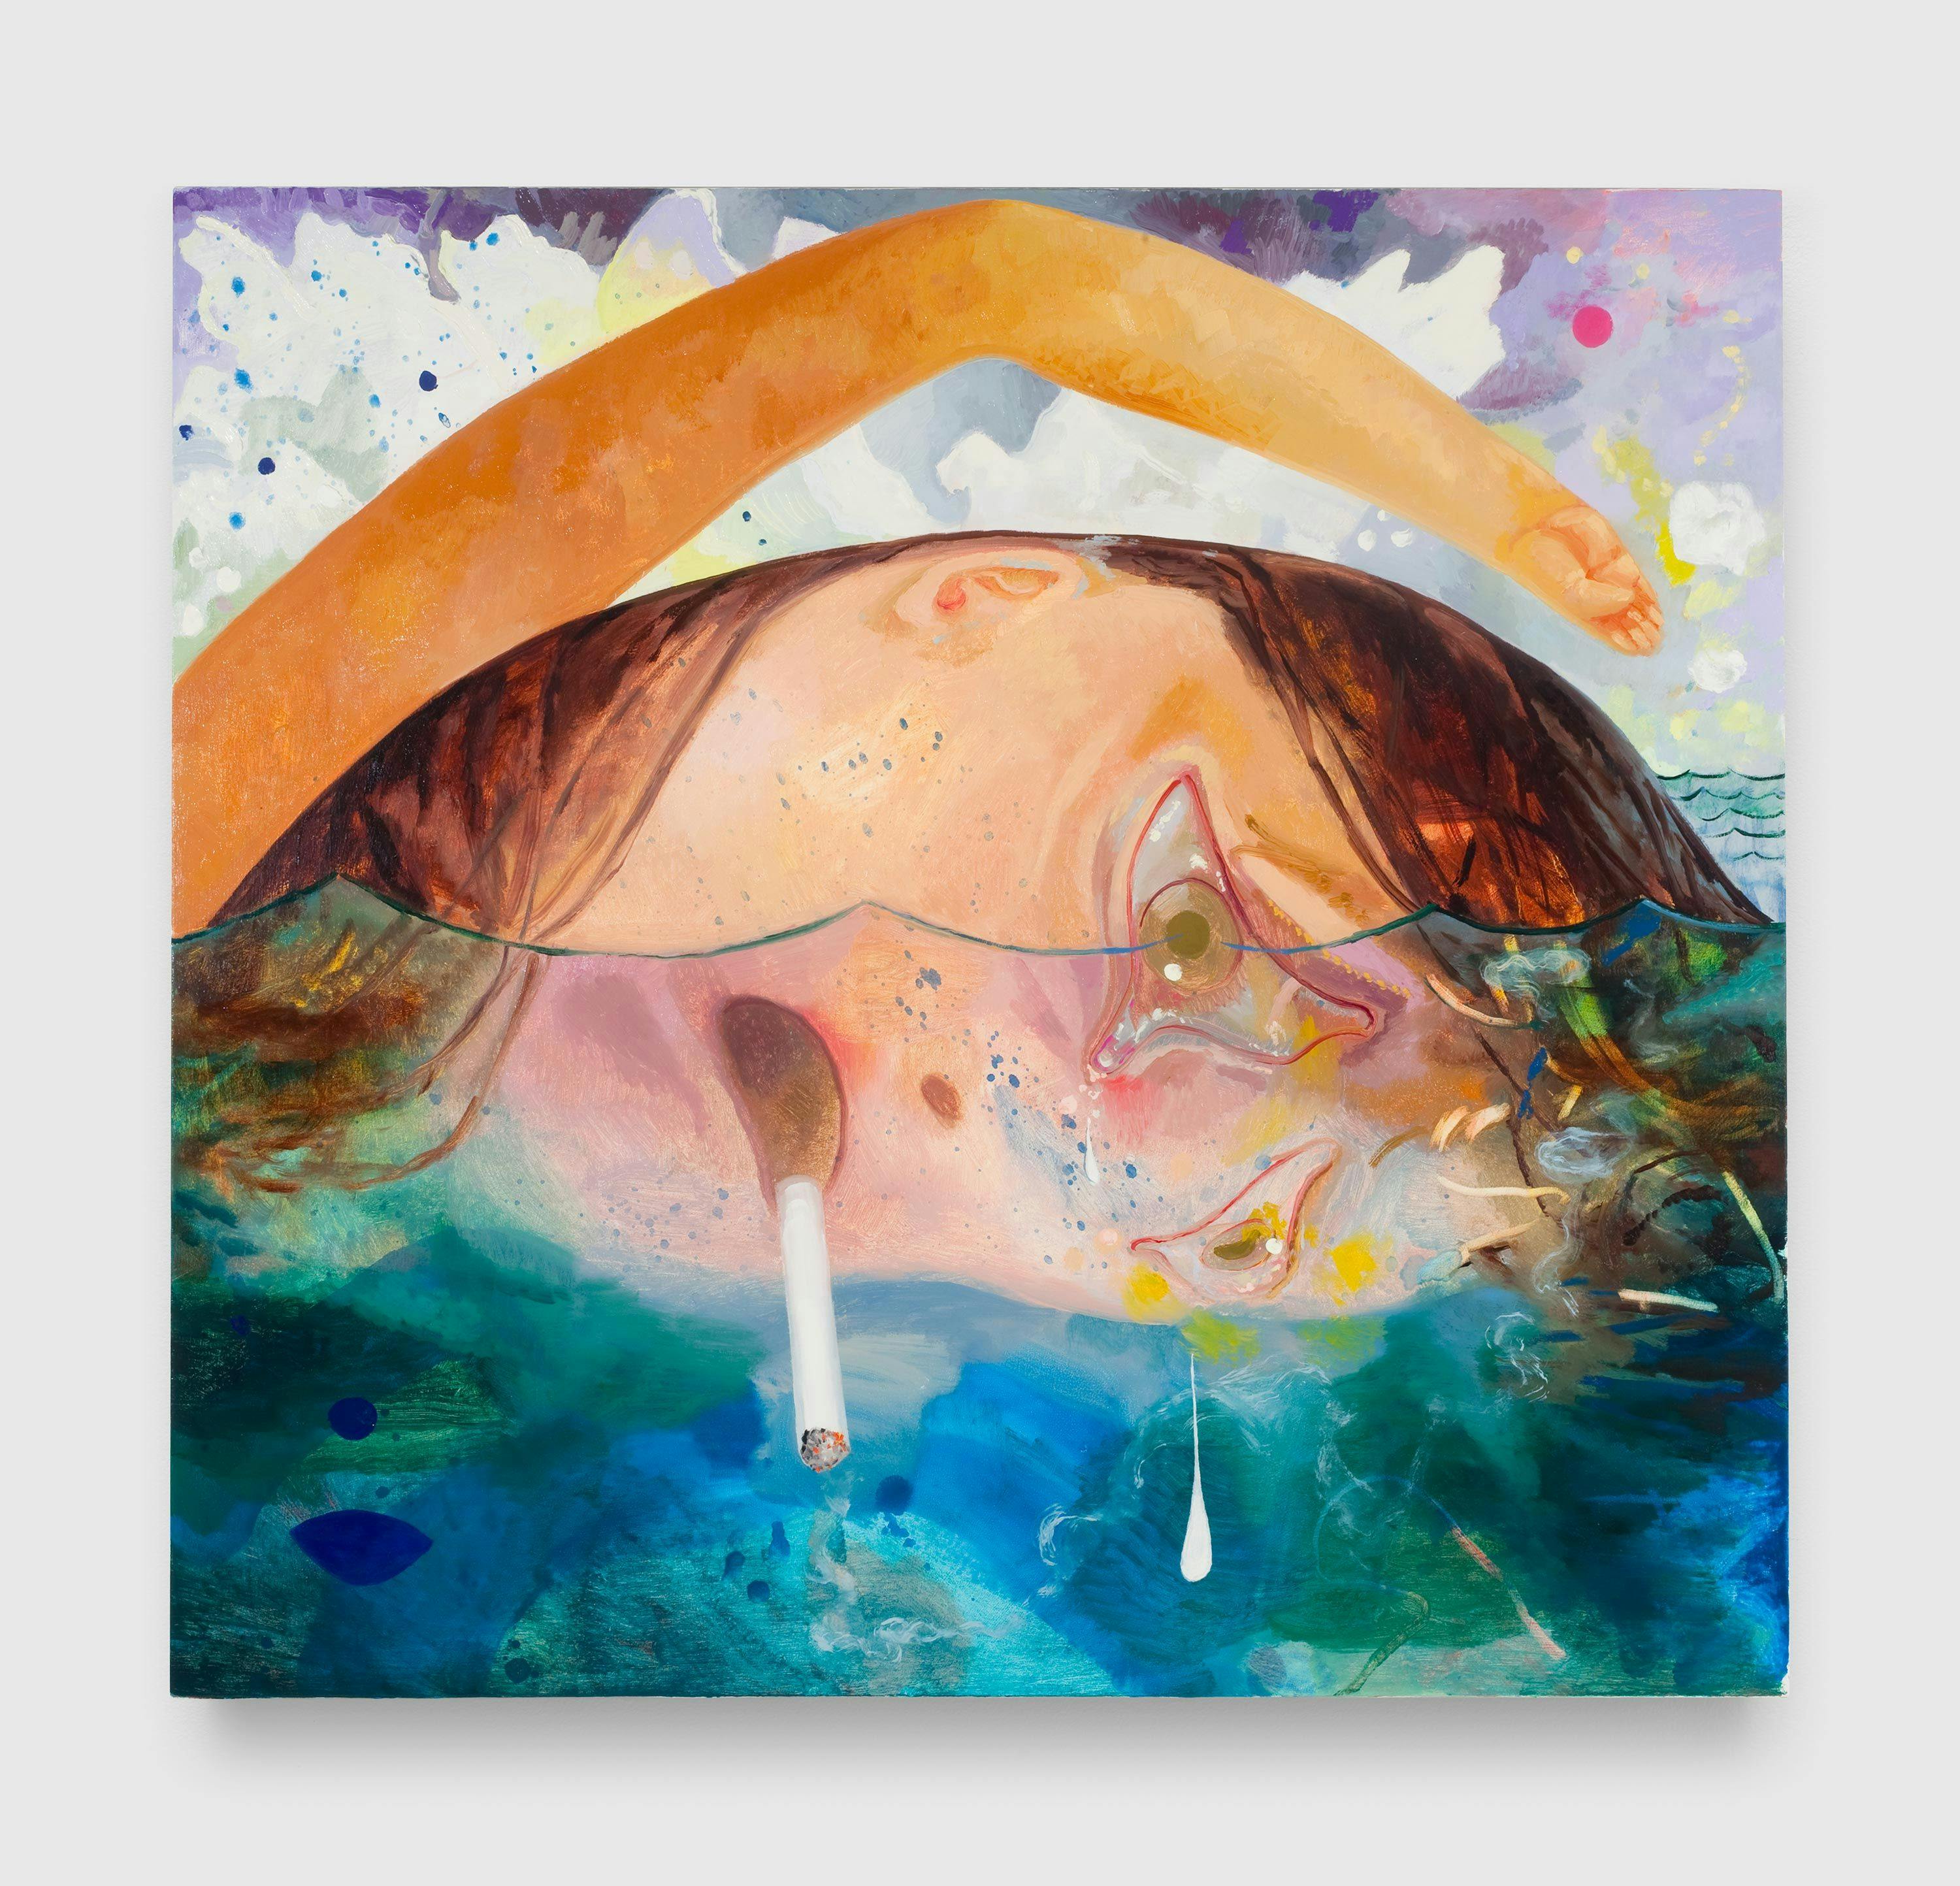 A painting by Dana Schutz, titled Swimming, Smoking, Crying, dated 2009.